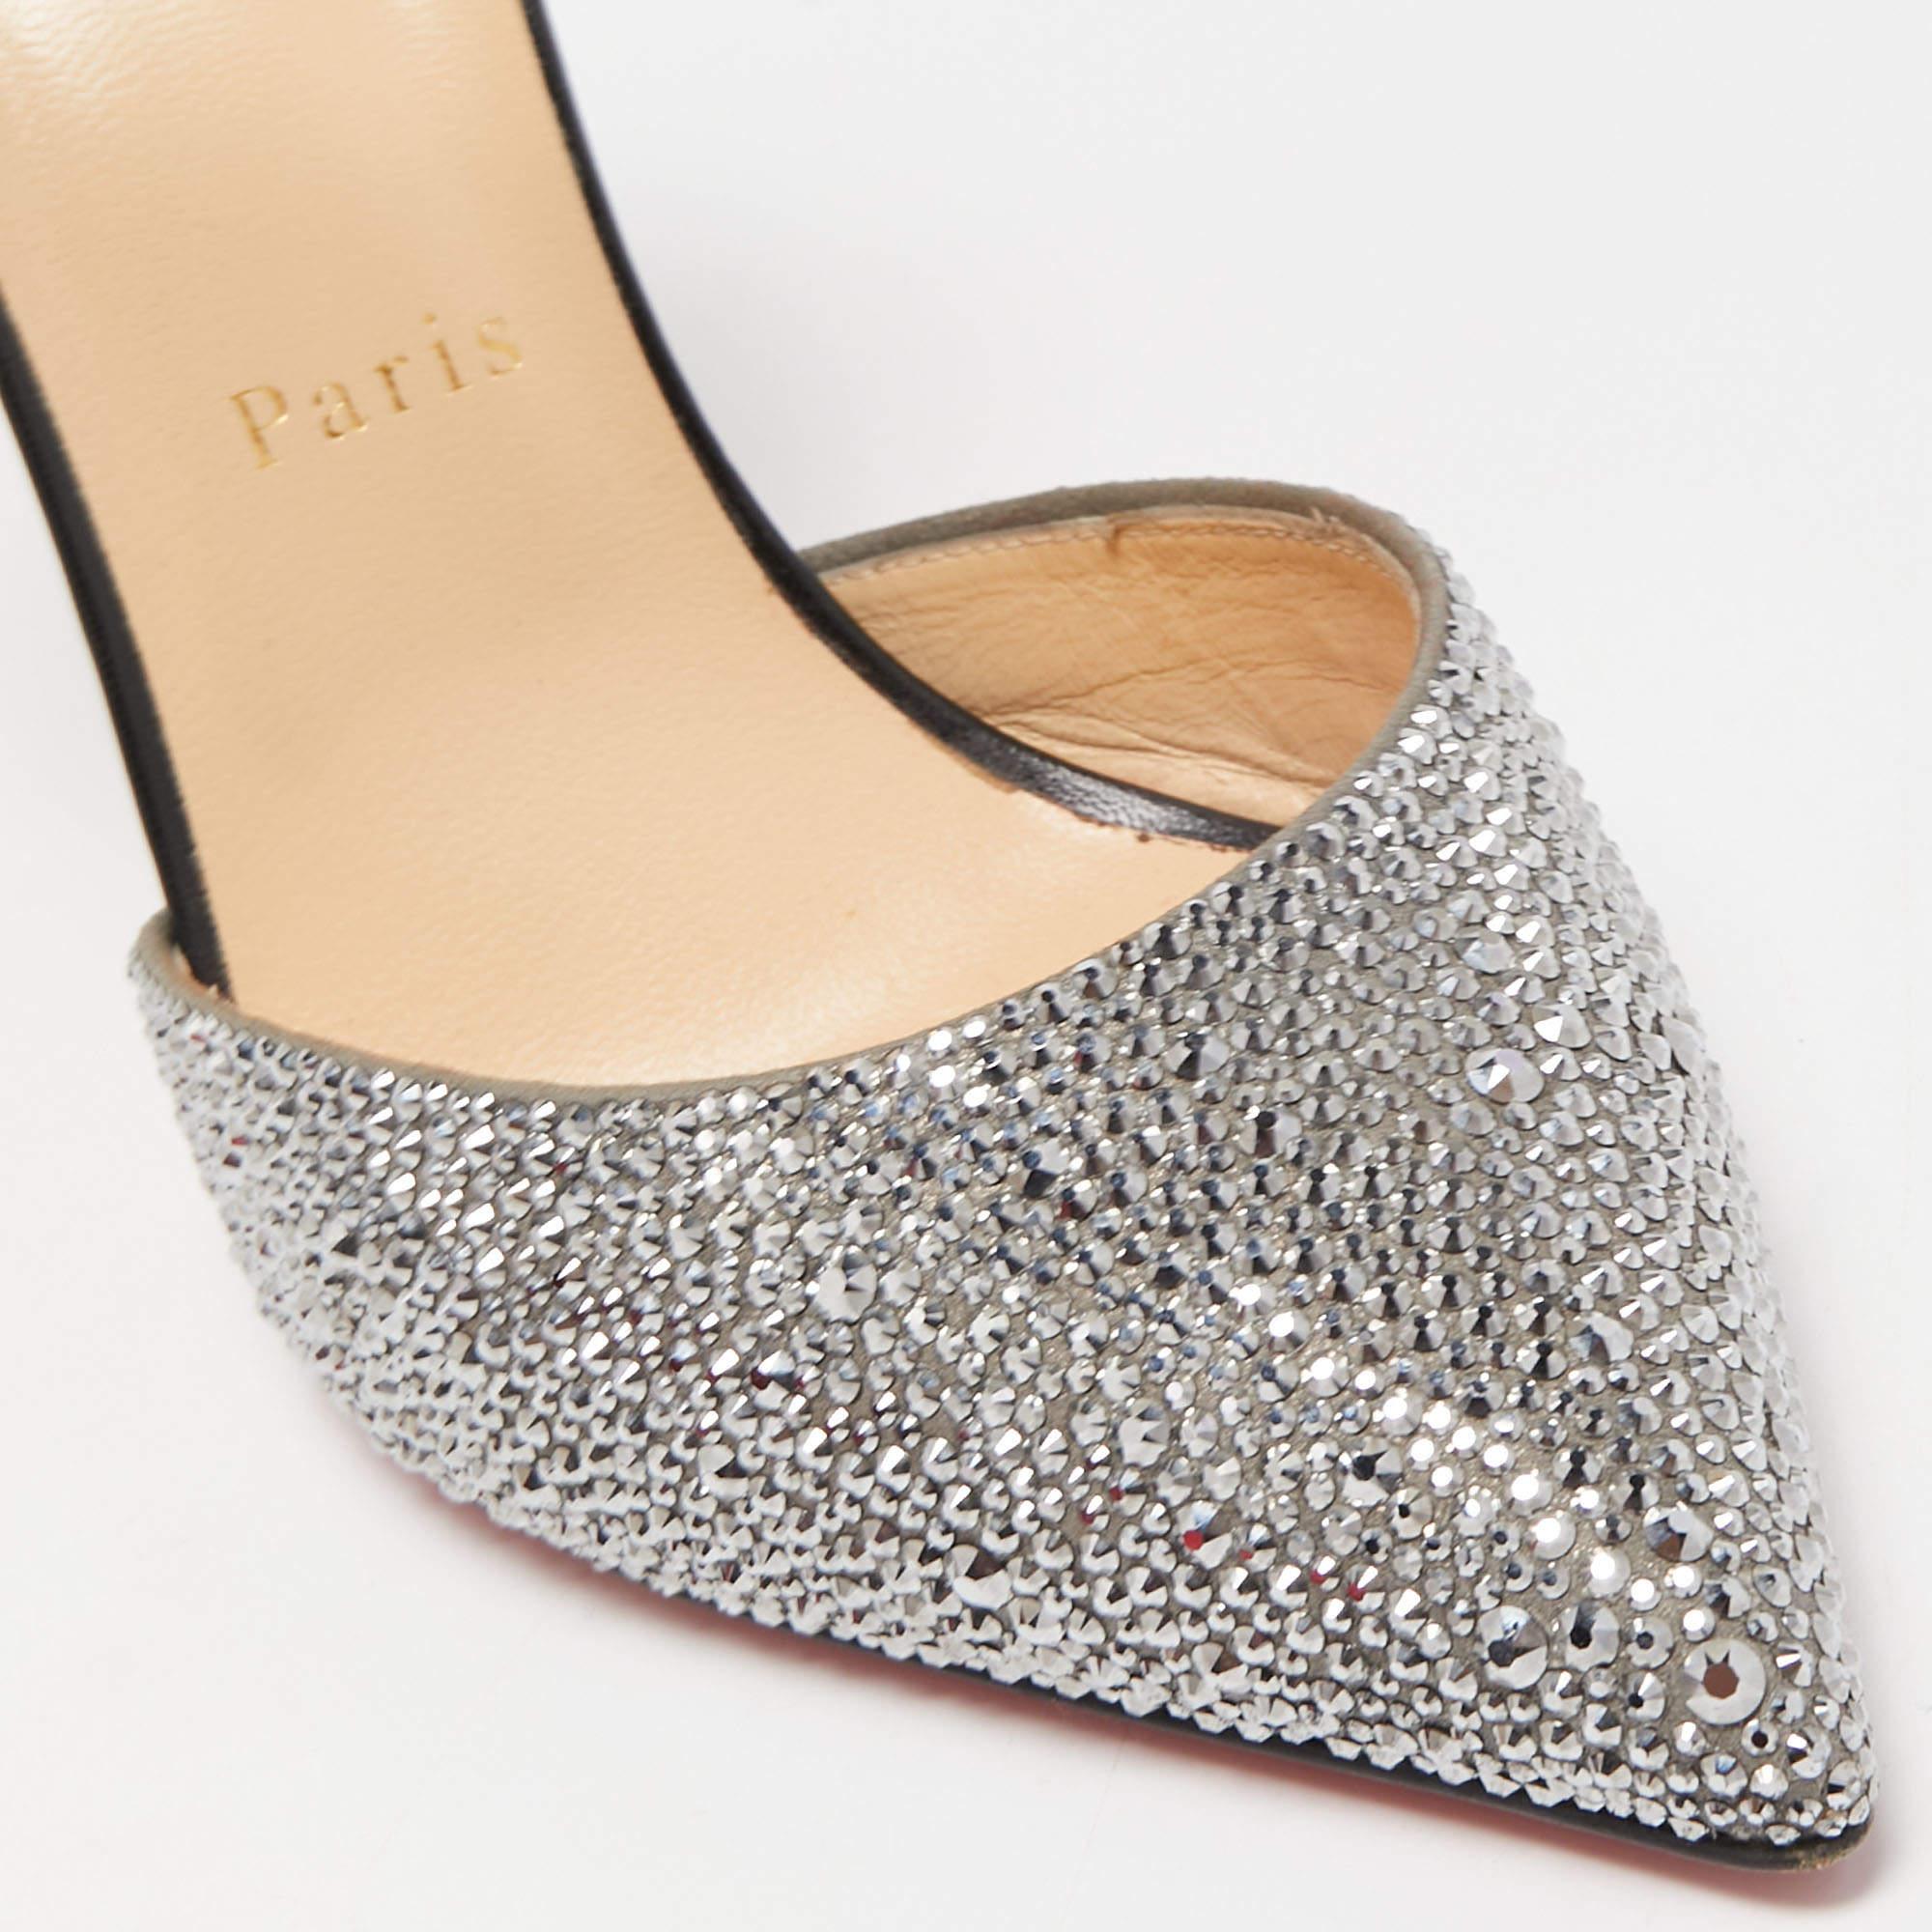 Women's Christian Louboutin Grey/Black Suede and Leather Rivierina Strass Pumps Size 39 For Sale